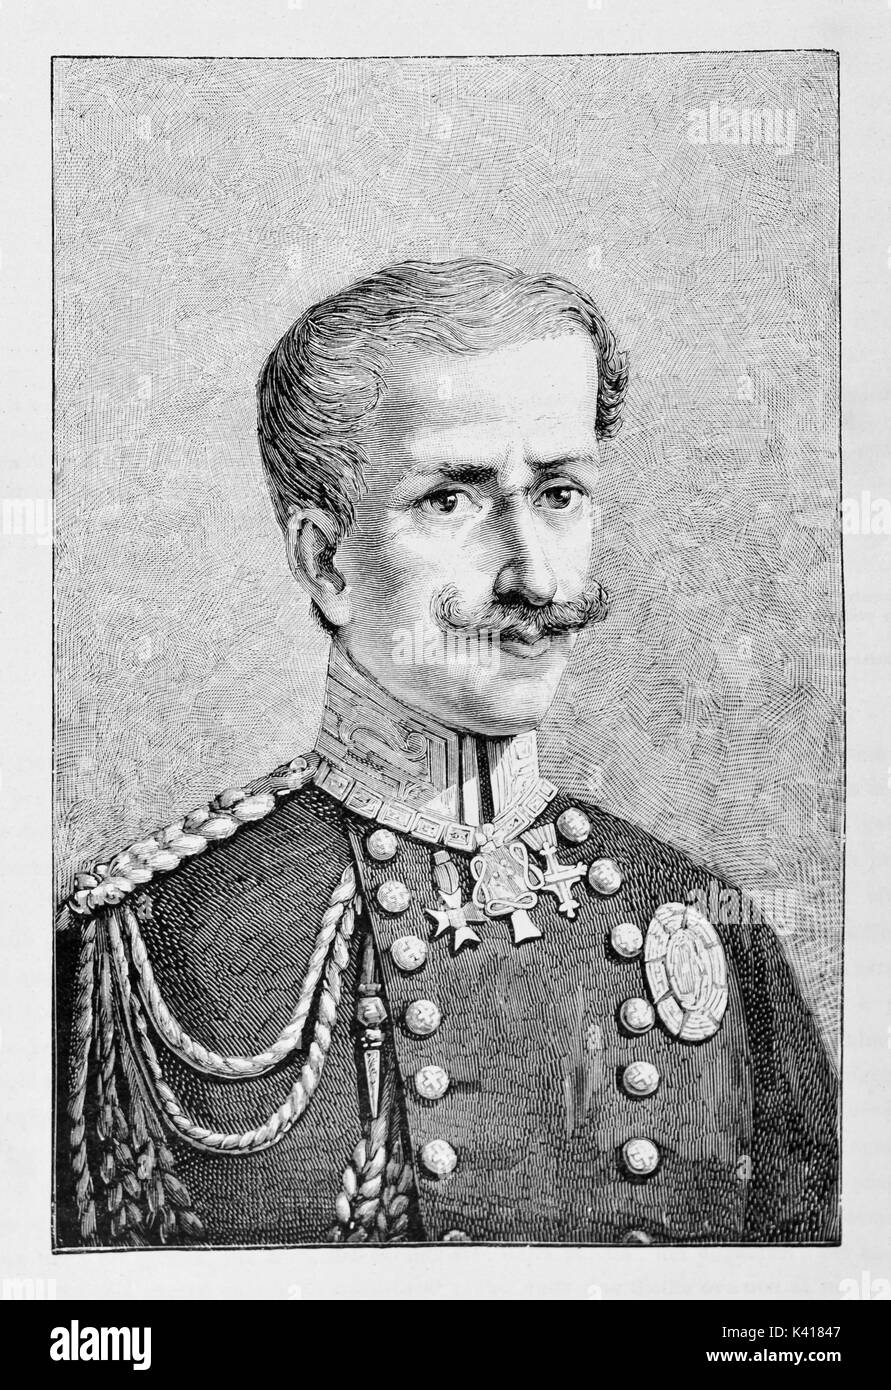 Ancient portrait of a king in uniform rich of medals and militar decorations. Charles Albert of Sardinia (1798 - 1849) King of Piedmont-Sardinia. By E. Matania, Italy 1884 Stock Photo